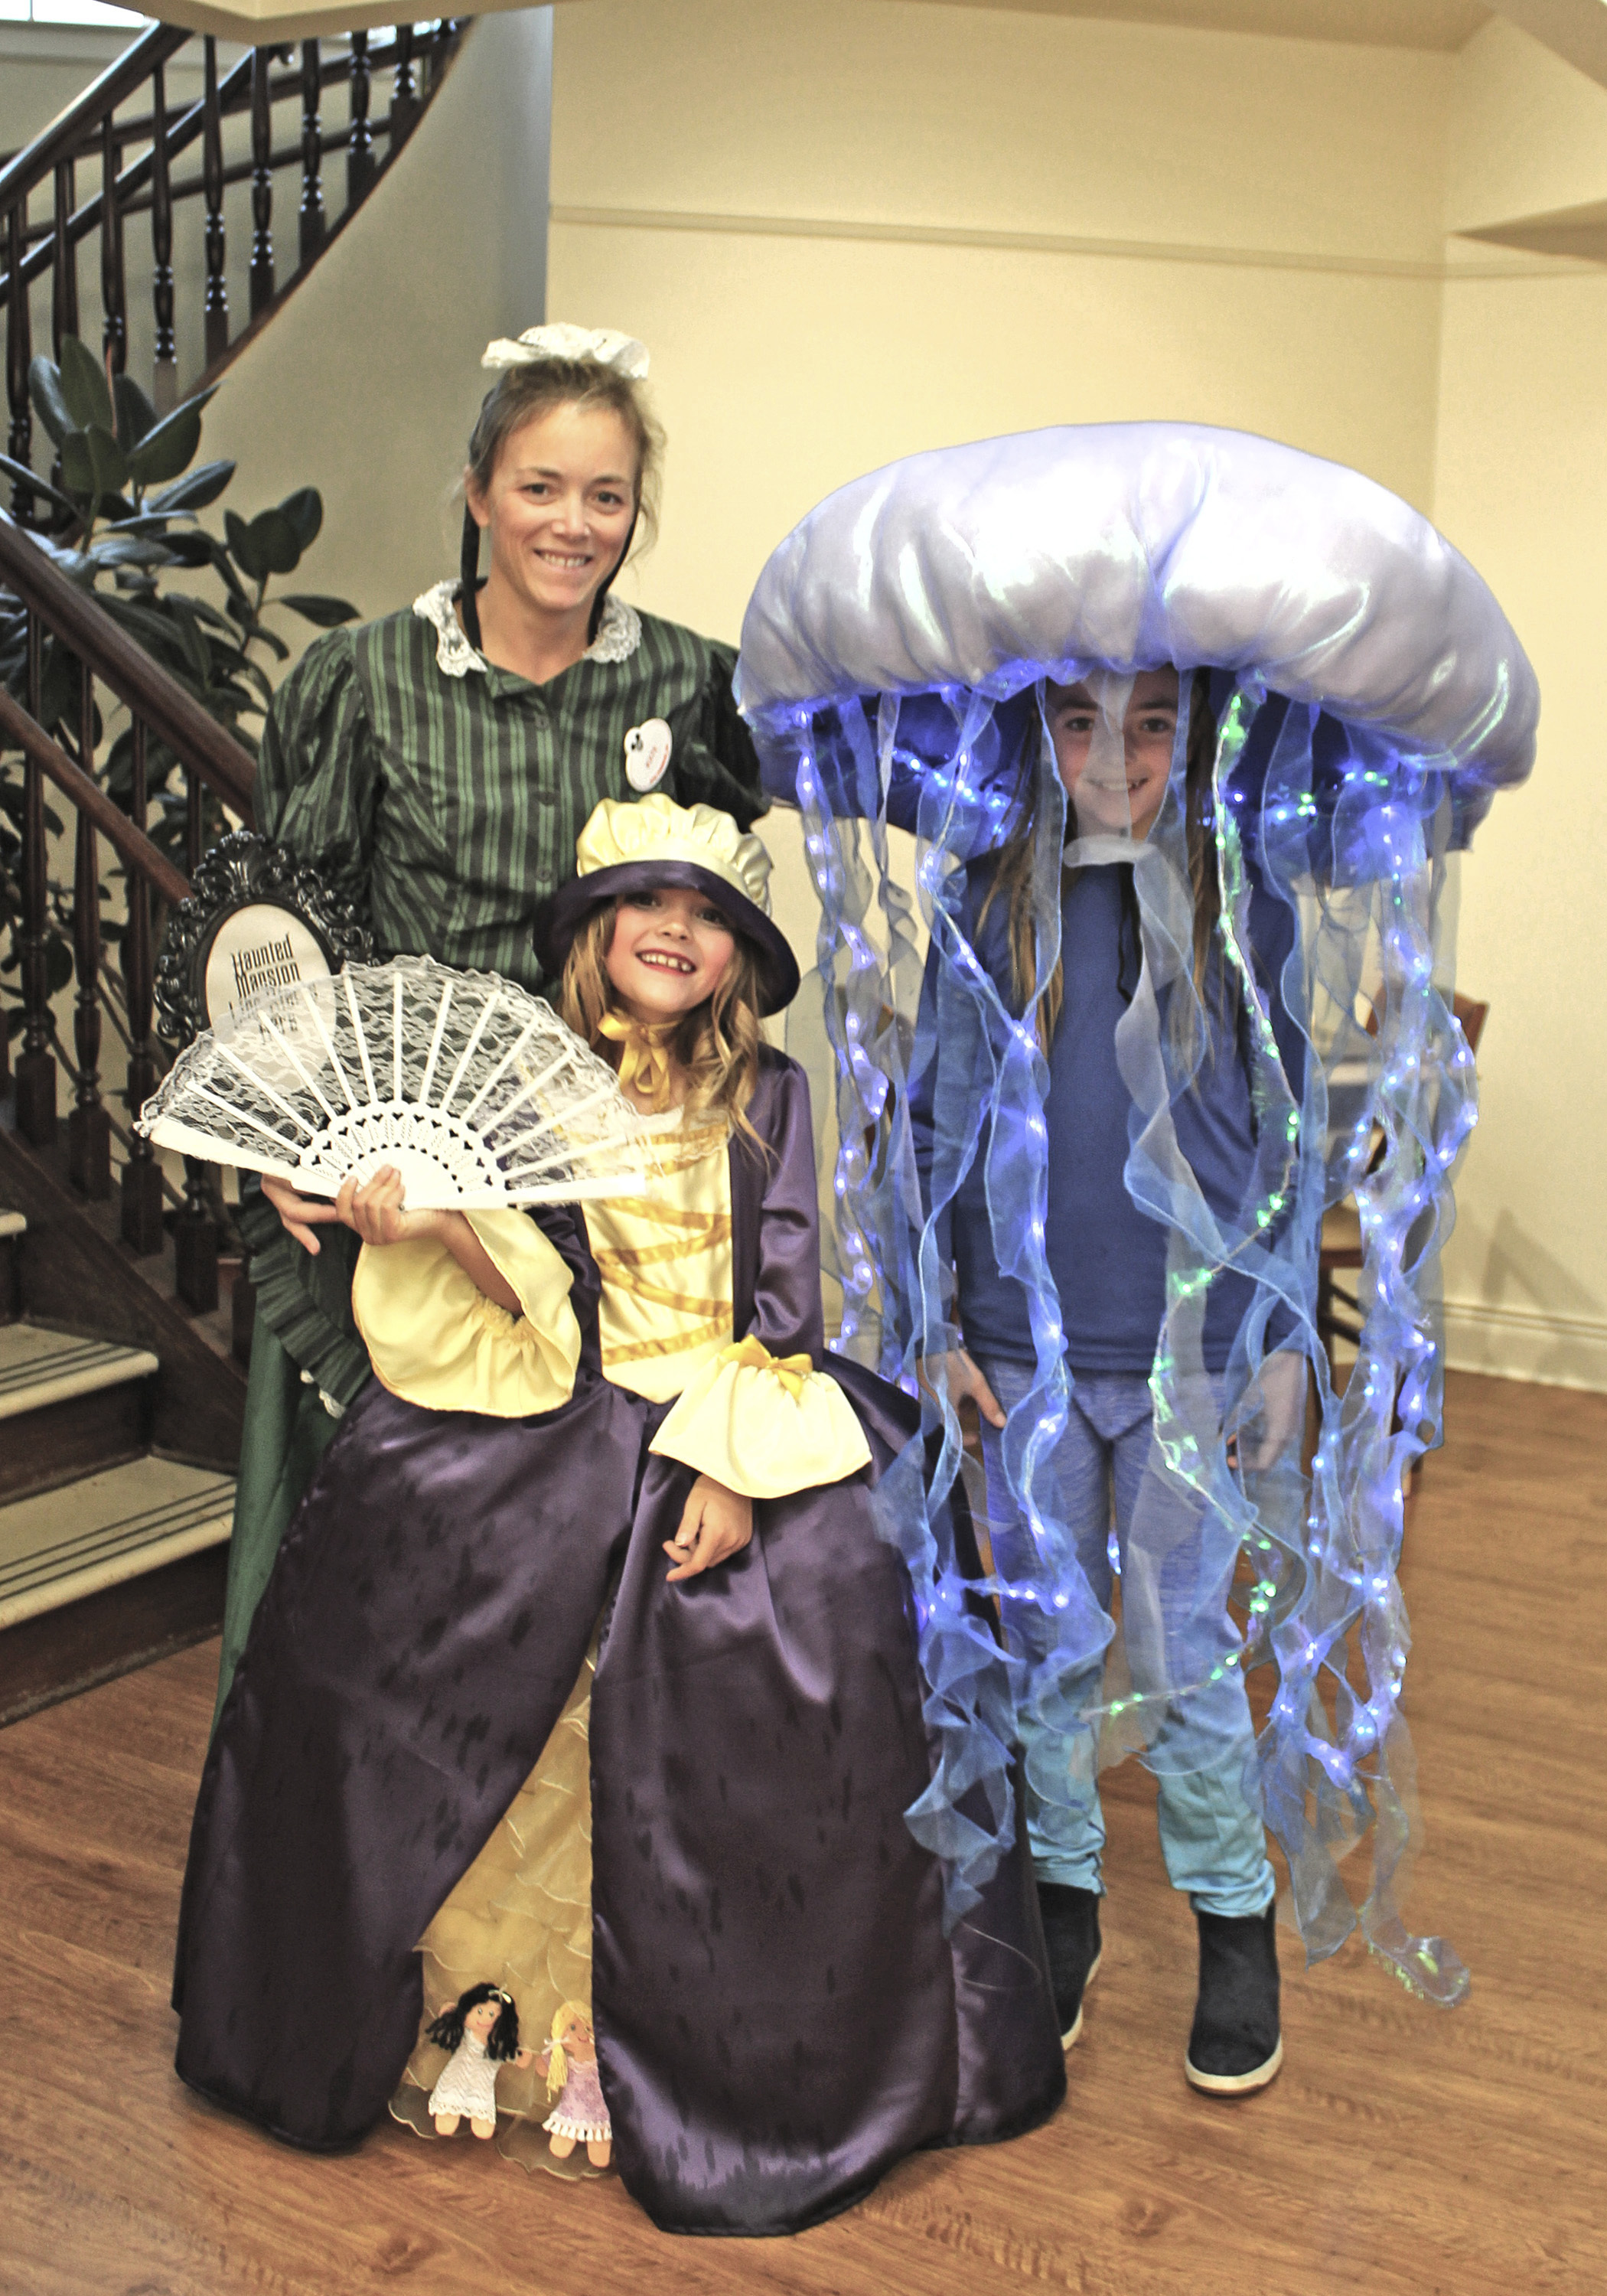 The annual Southampton Chamber ragamuffin parade was relocated to the Rogers Memorial Library on Sunday due to inclement weather. Kate, Violet and Sabrina McManus show their Holiday spirit. TOM KOCHIE